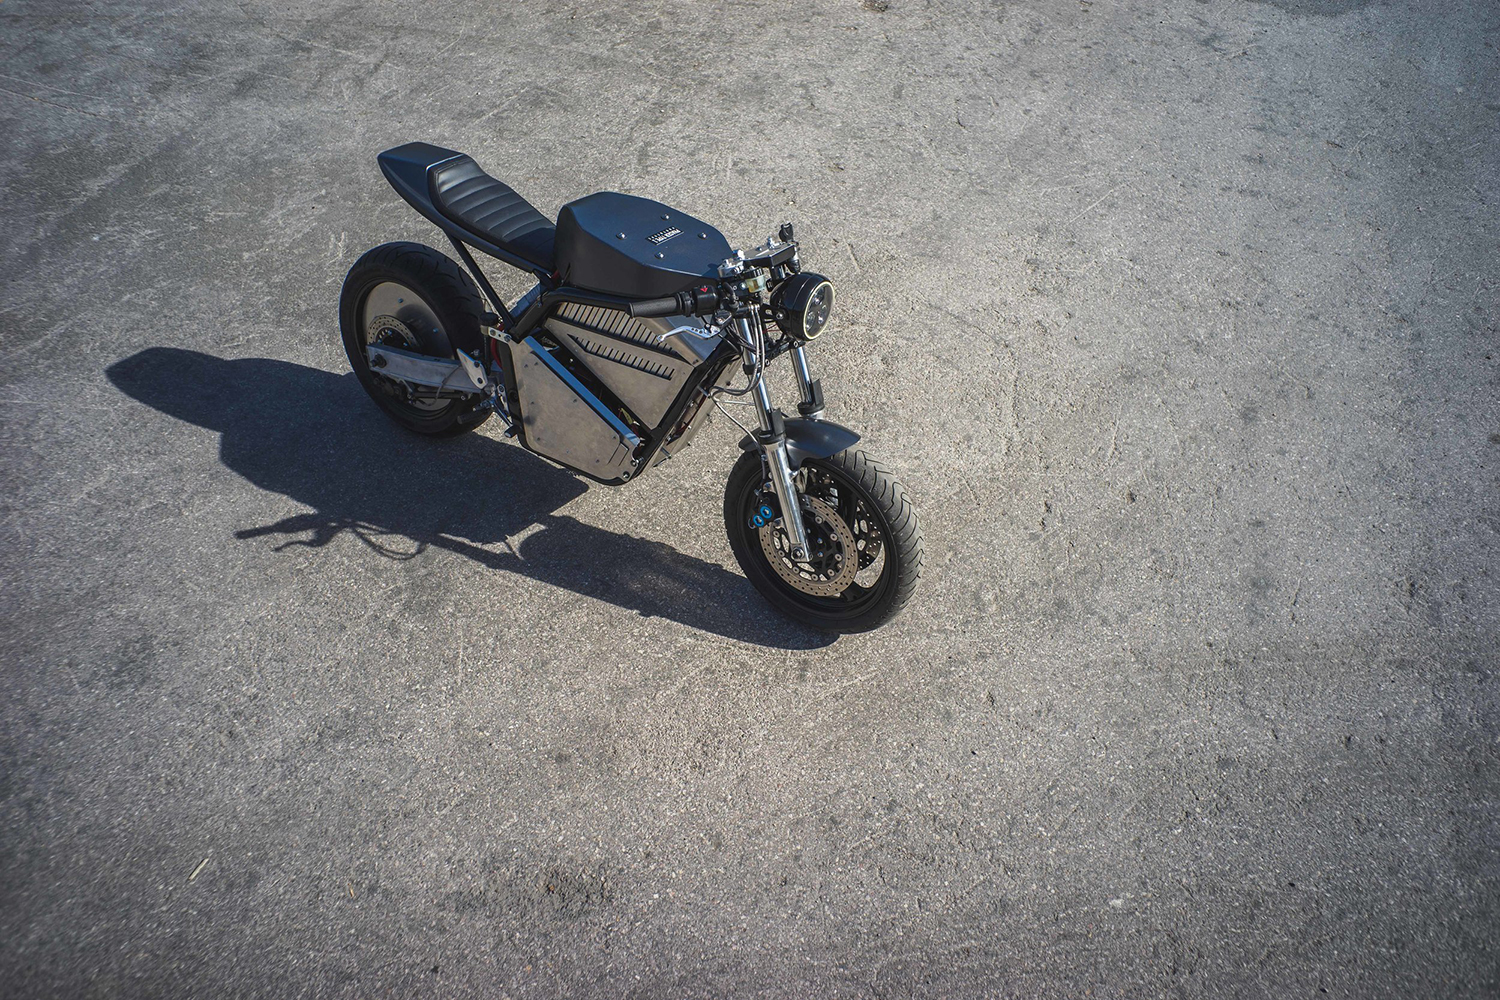 union motion phase type 1 electric motorcycle 07